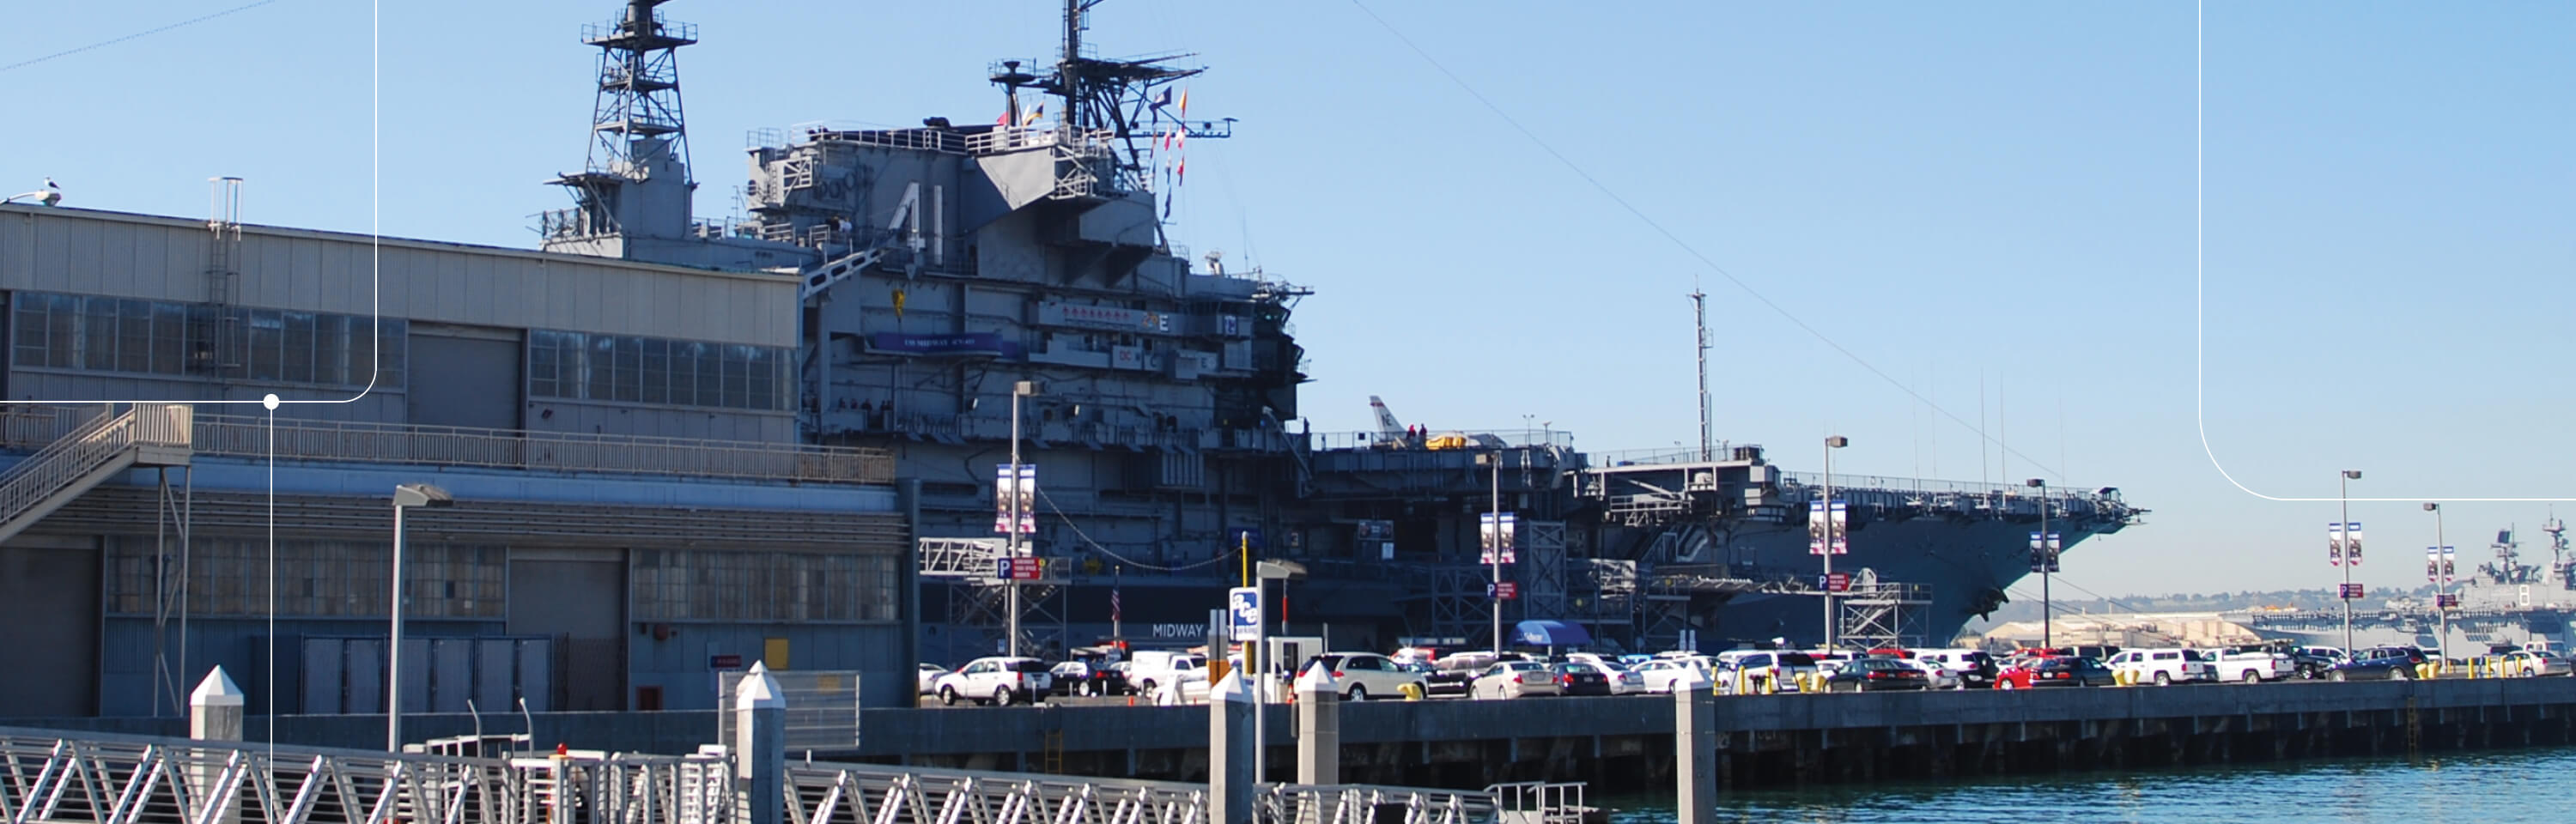 View of USS Midway Aircraft Carrier in San Diego, CA